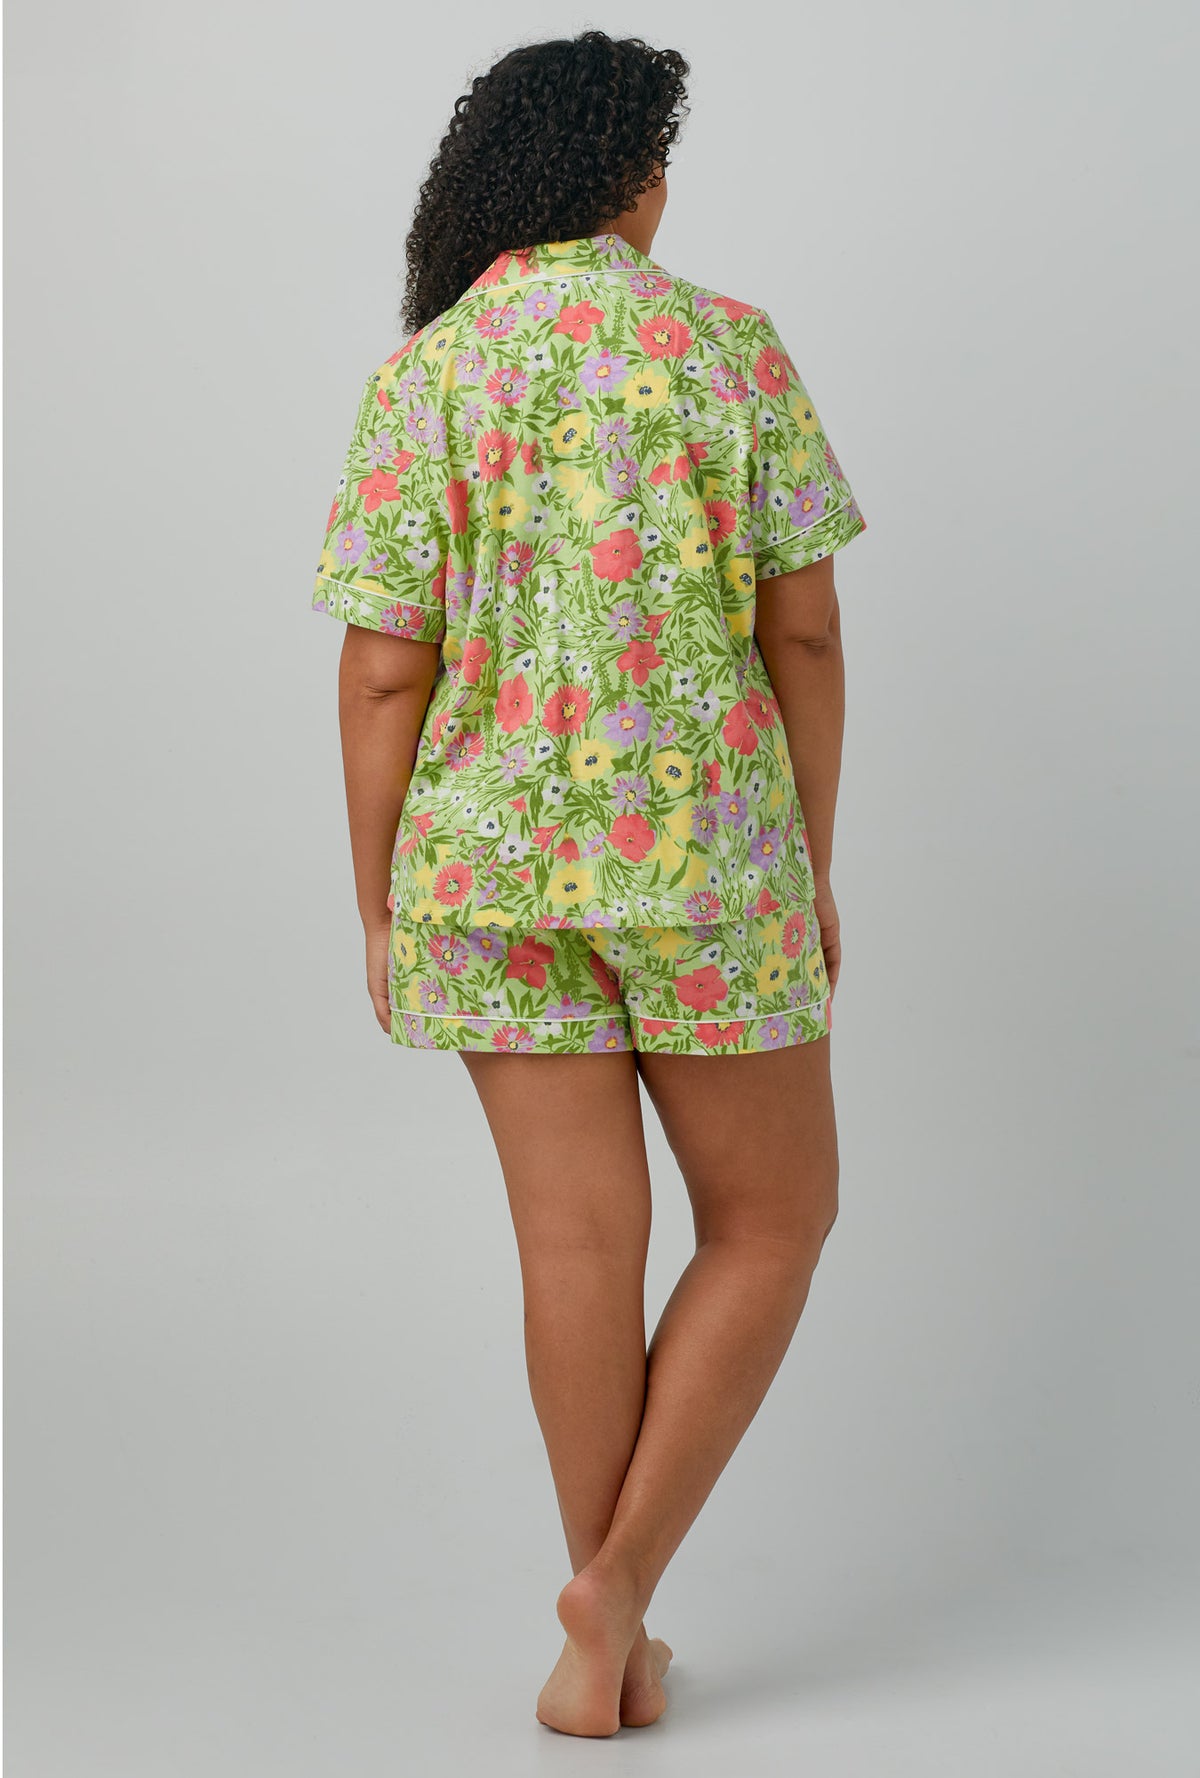 A lady wearing Short Sleeve Classic Shorty Stretch Jersey PJ Set with whispering meadow print